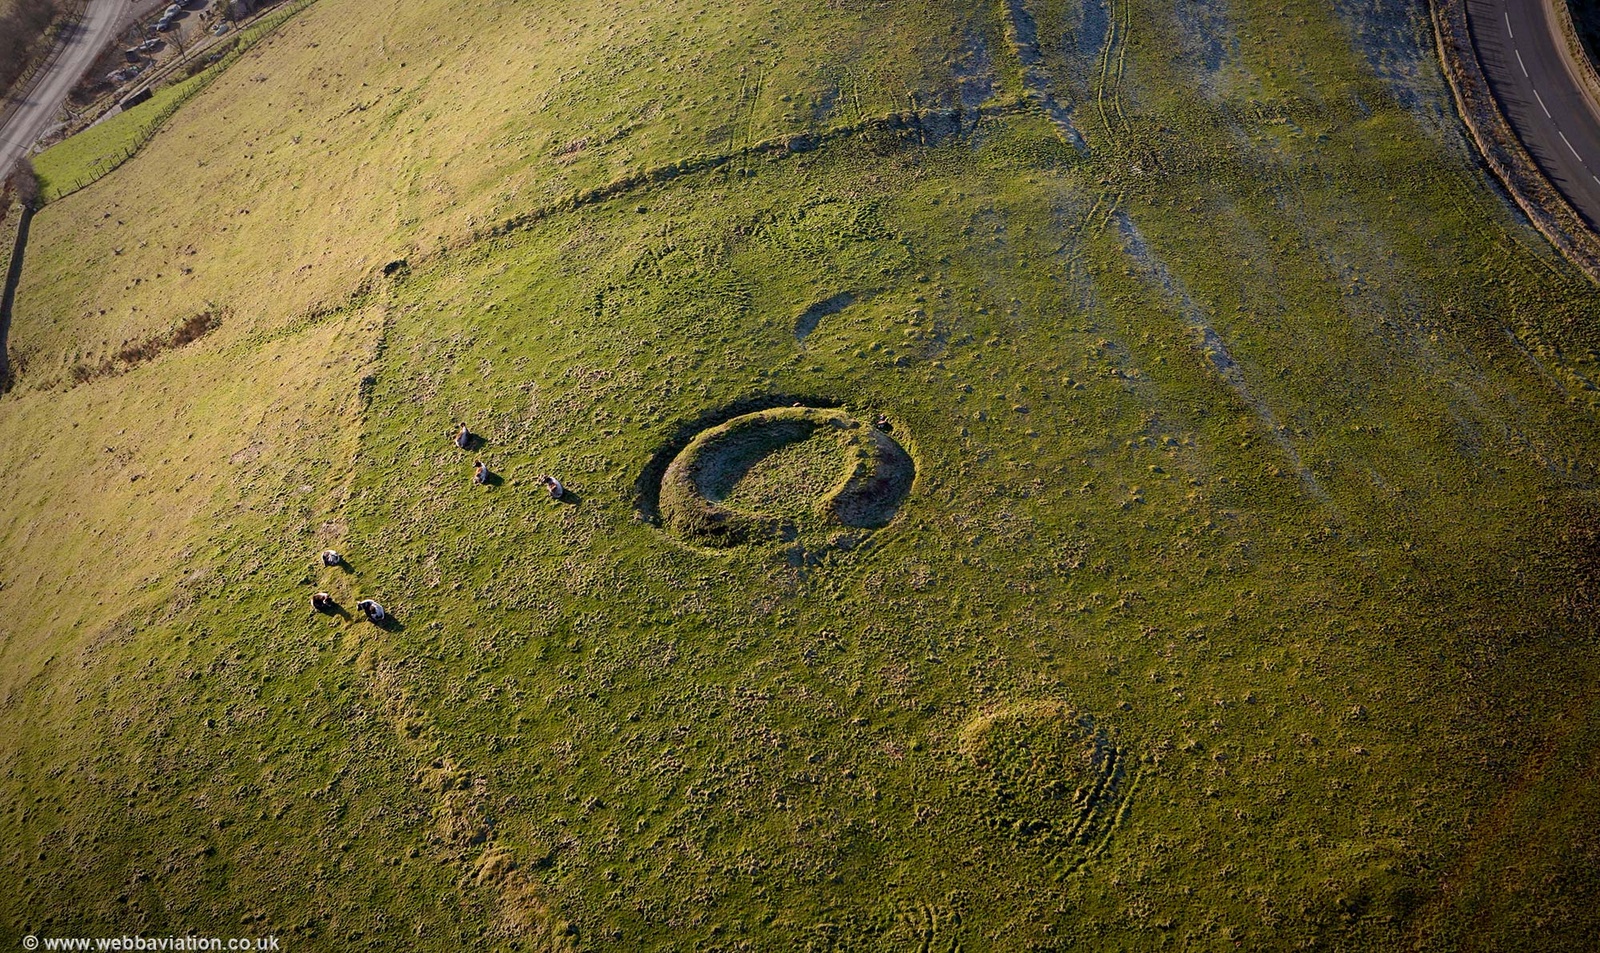  remains of a World War II anti aircraft gun emplacement  from the air